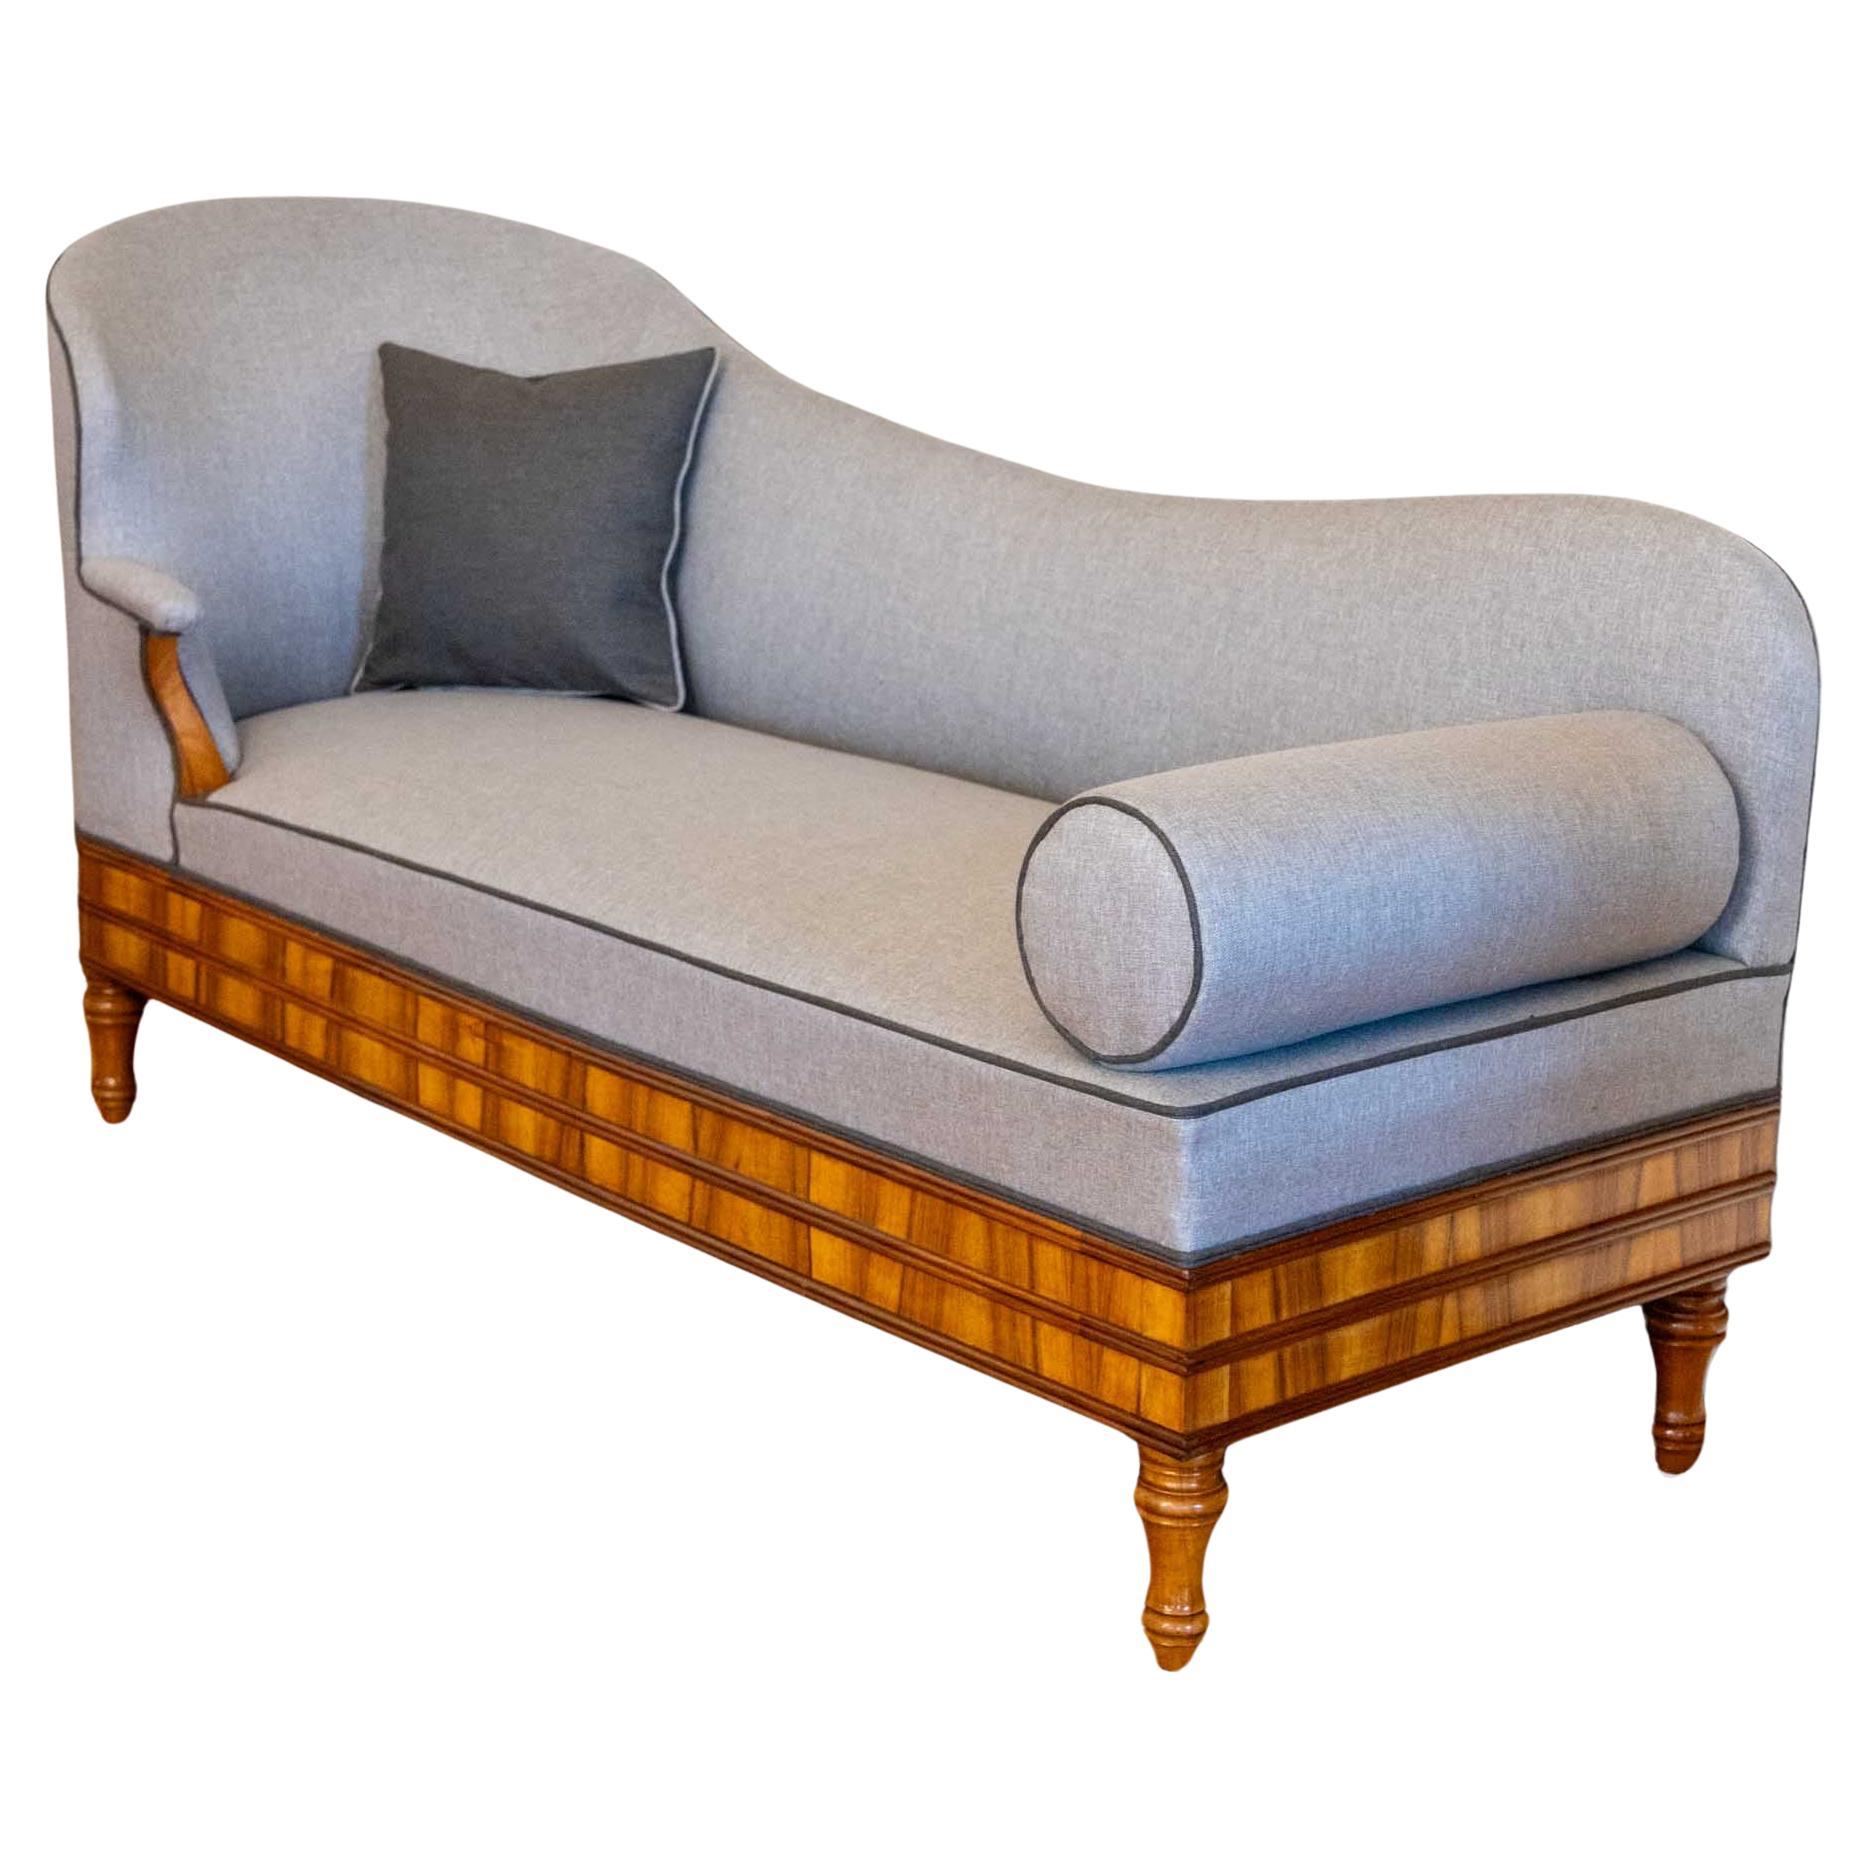 Recamiere or Chaise Longue, Germany circa 1830 For Sale